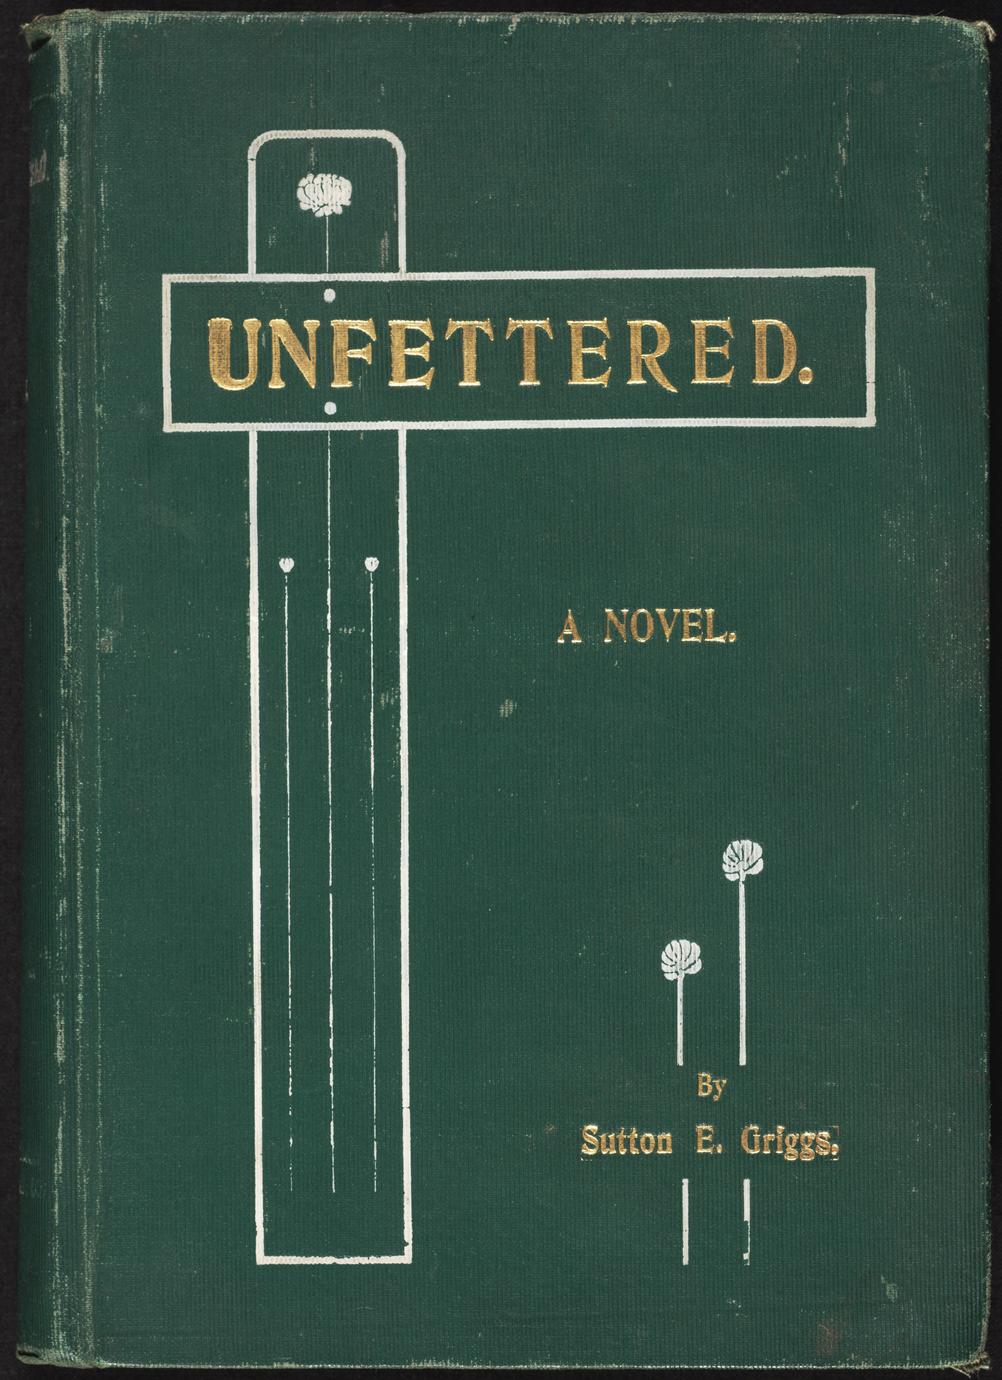 Unfettered : a novel ; Dorlan's plan : sequel to Unfettered : a dissertation on the race problem (1 of 3)